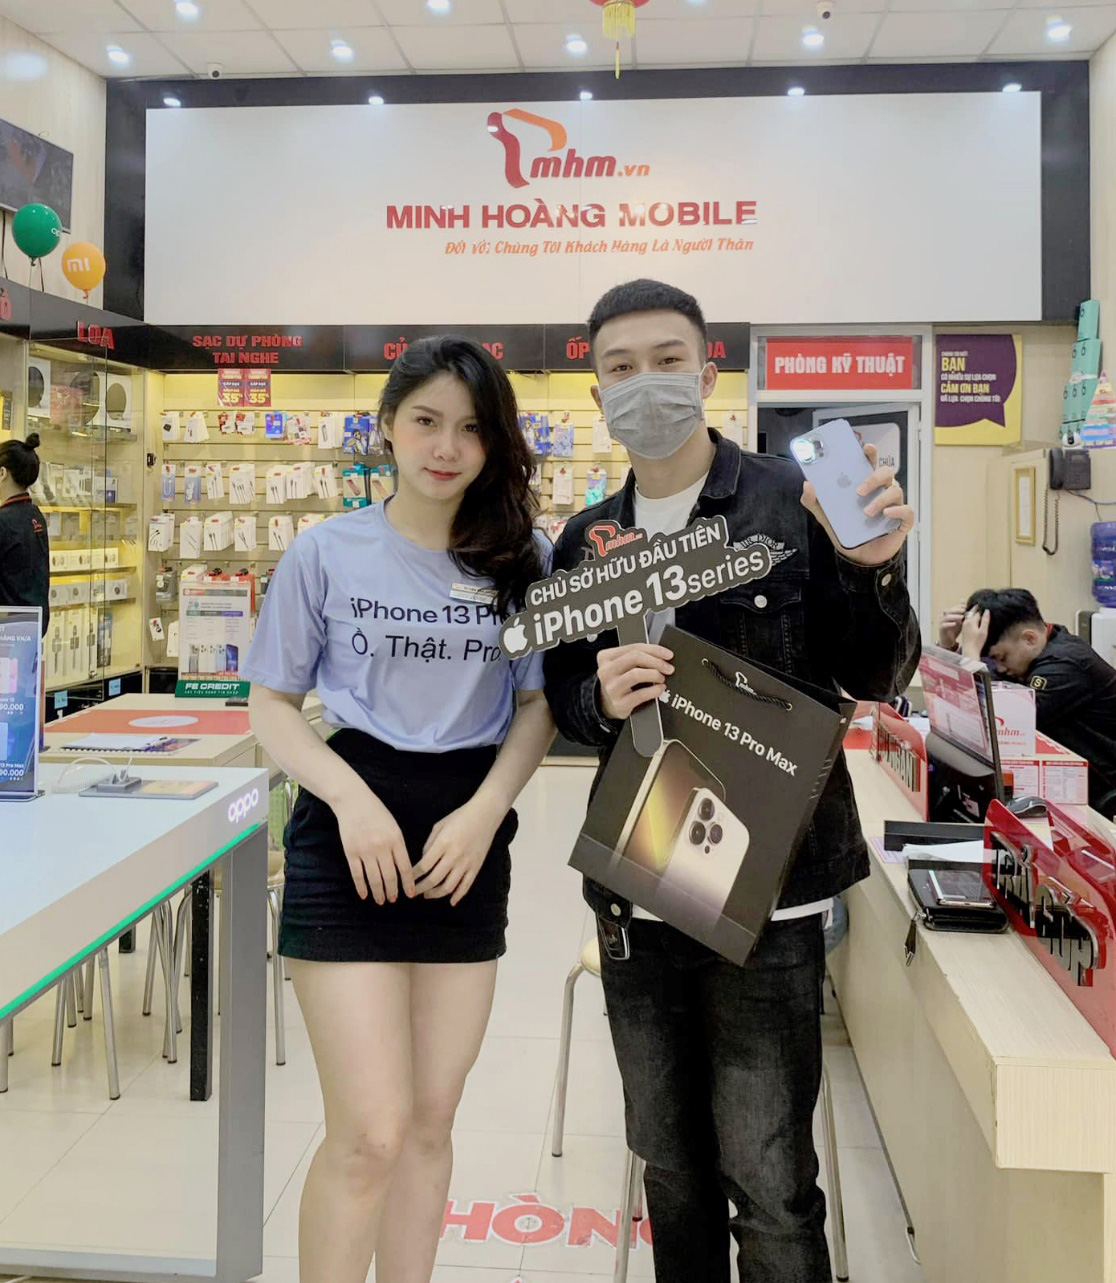 Minh Hoang Mobile launched the 3000 iPhone 13 campaign at an attractive price - Photo 4.